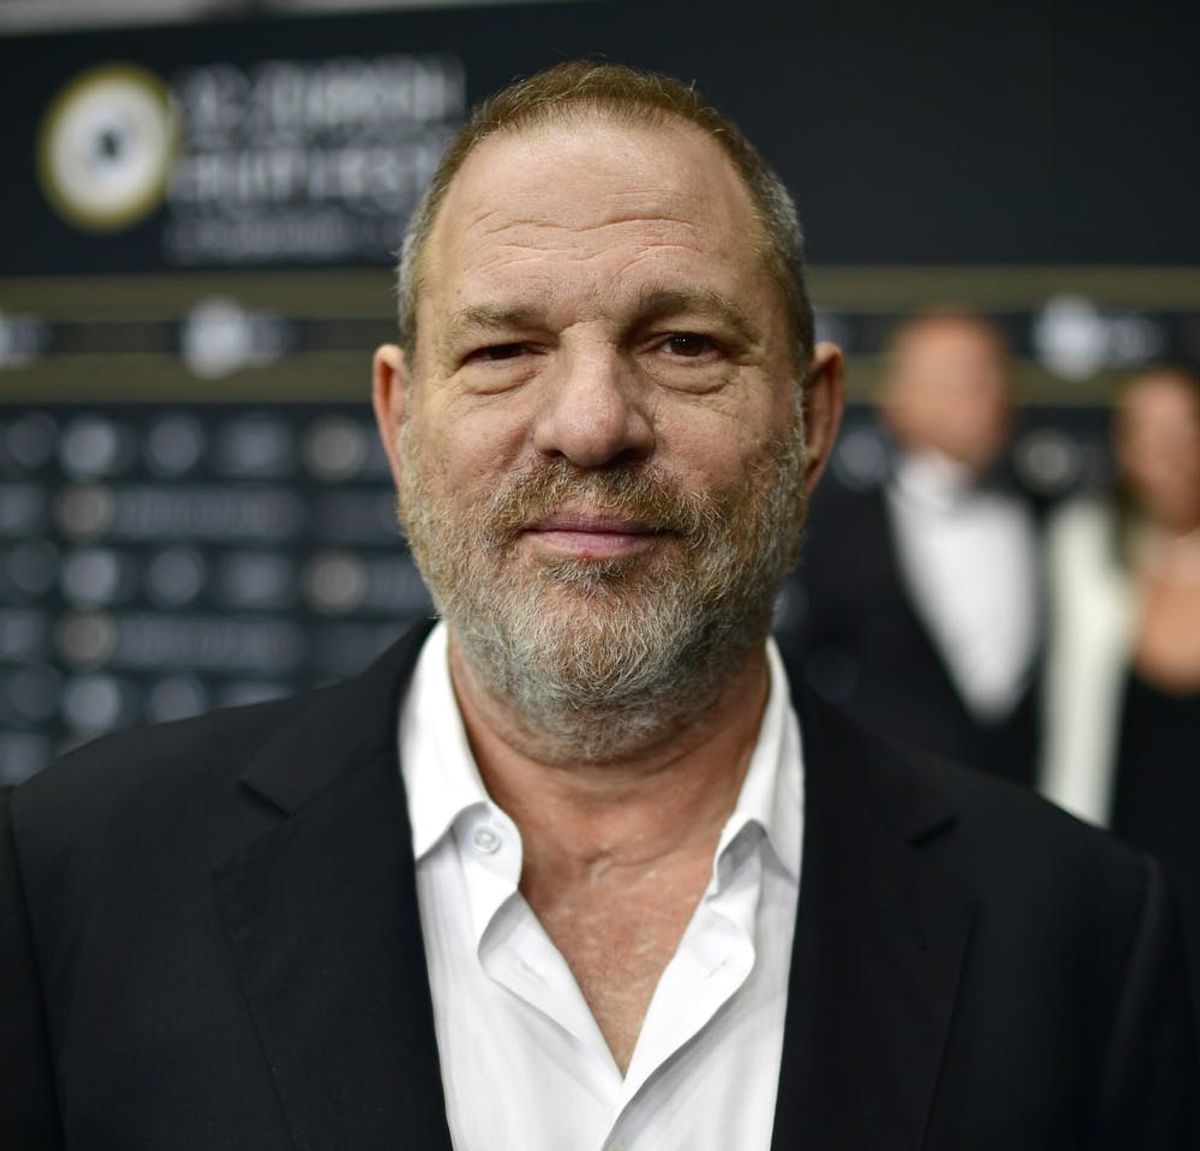 A Timeline of the Harvey Weinstein Allegations and Aftermath So Far